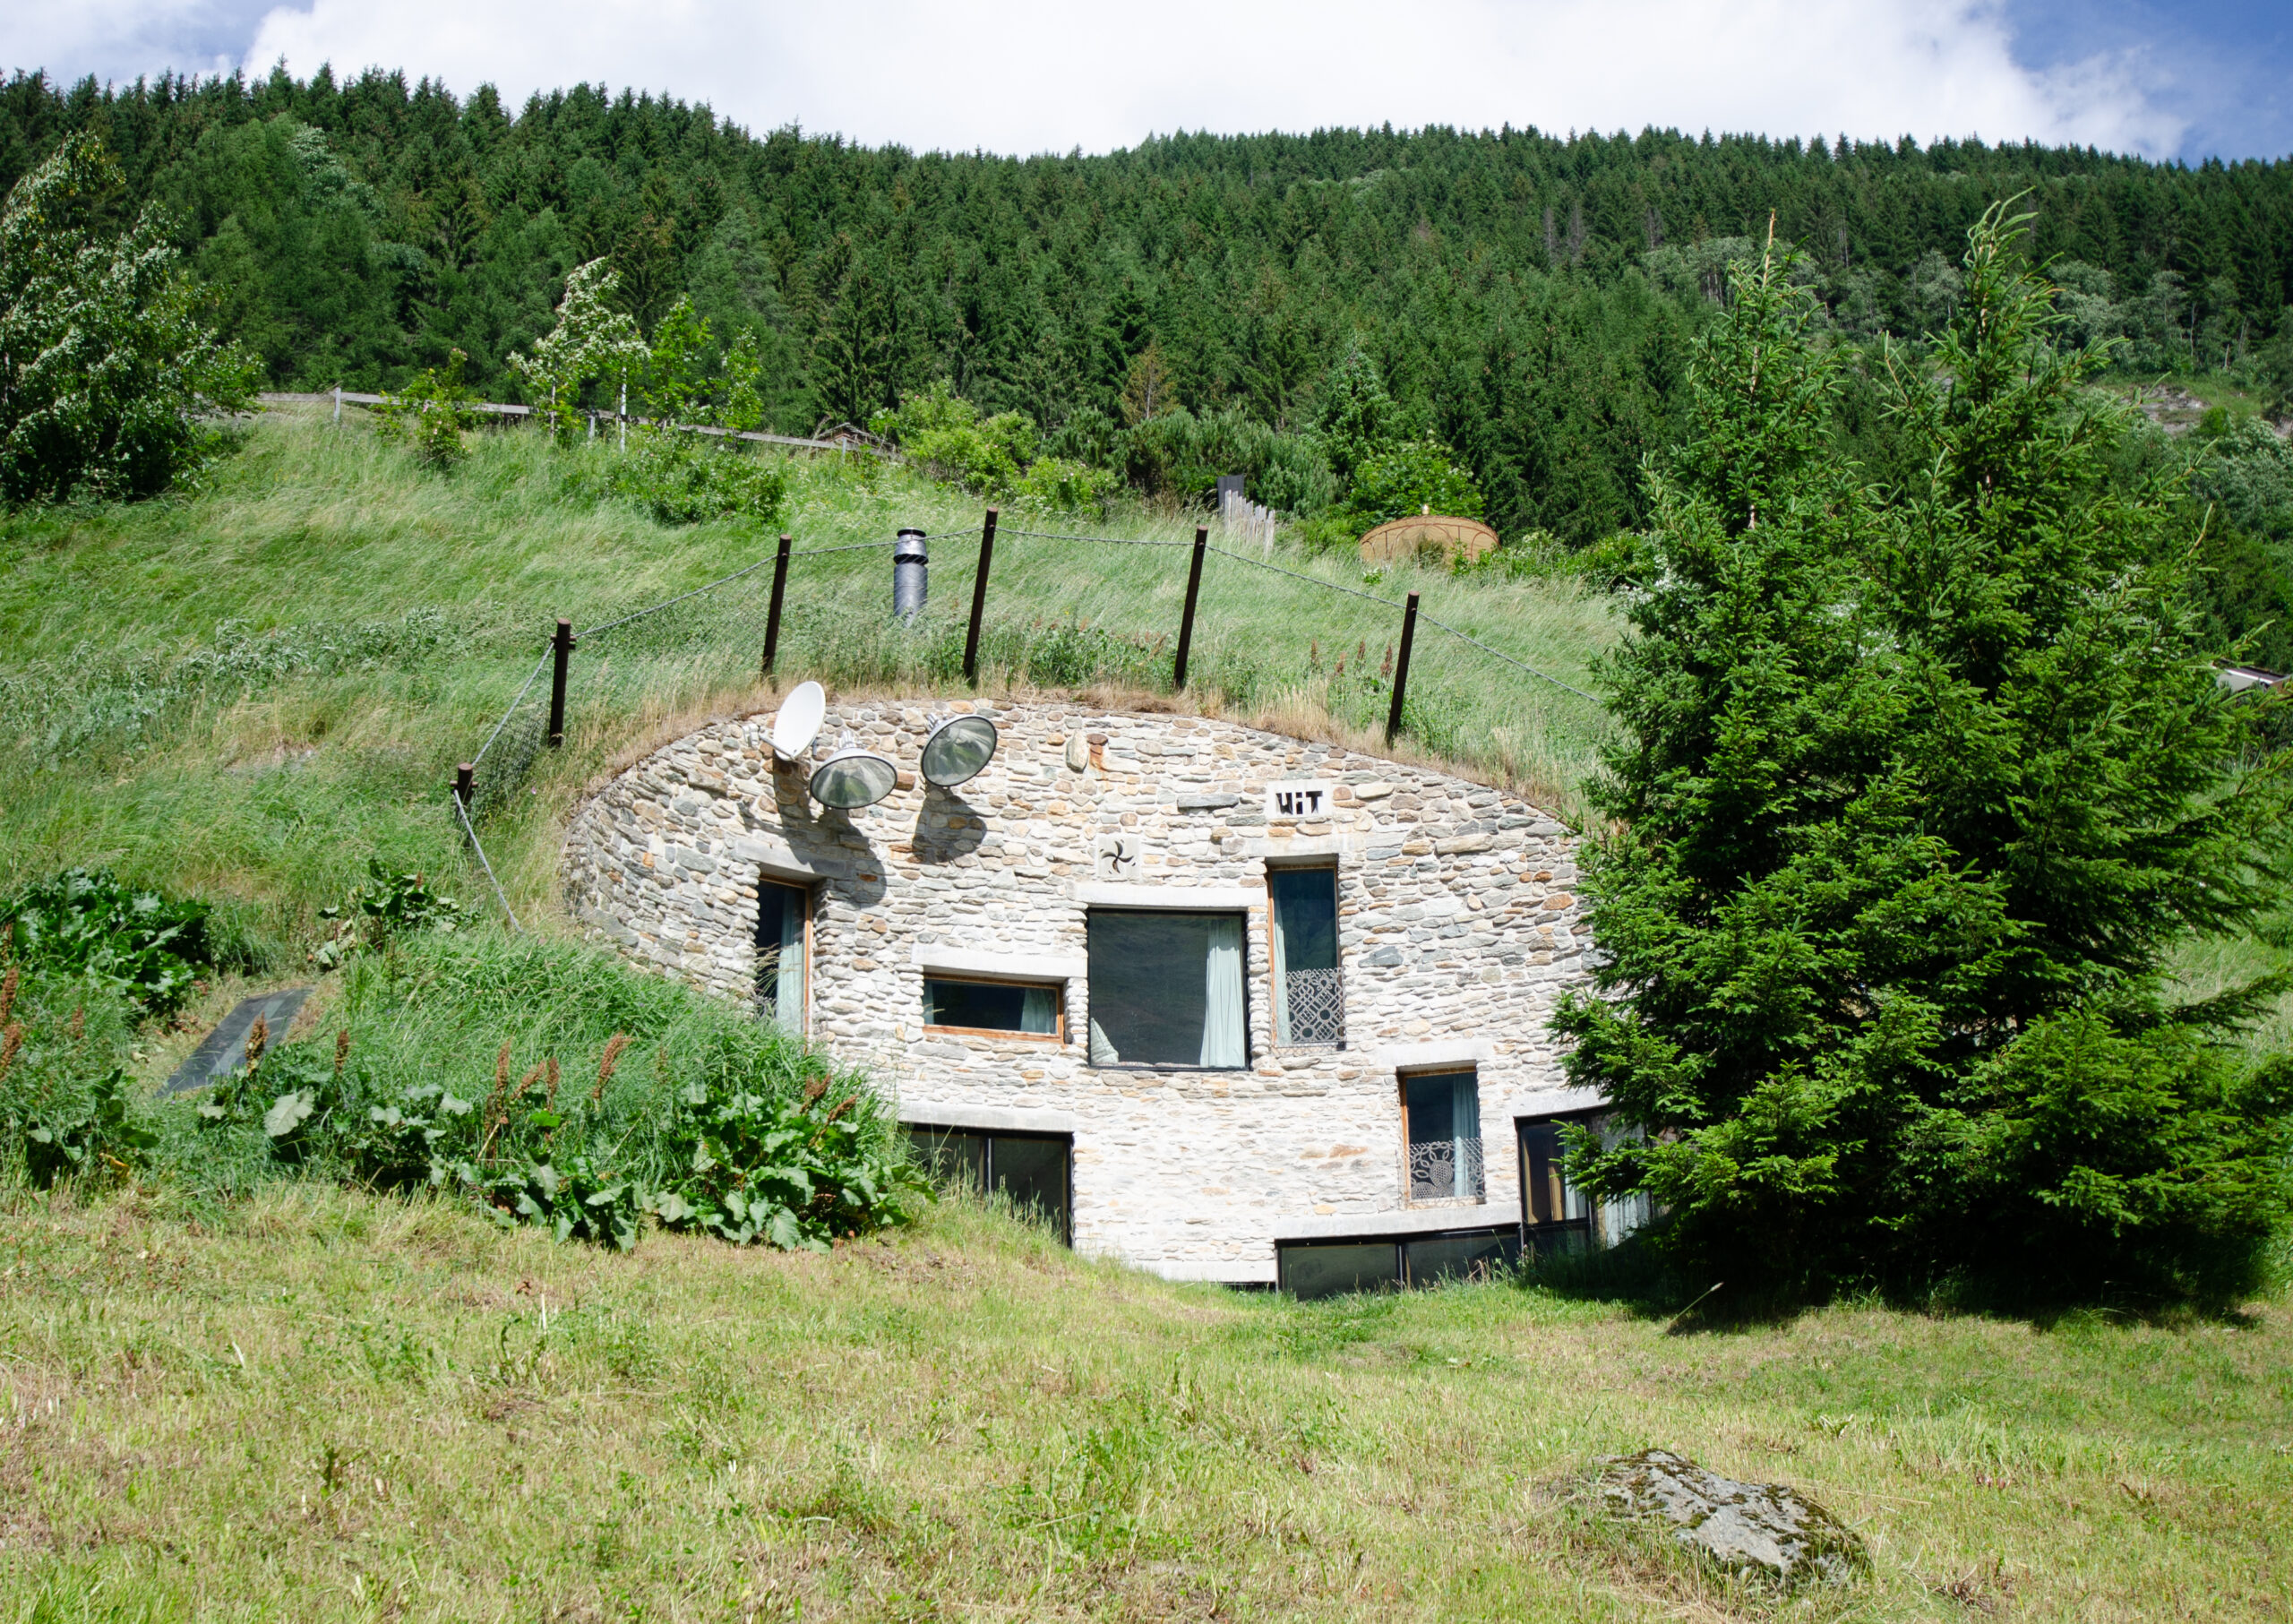 Stay in This Modern Hobbit Home in a Swiss Hillside | NUVO